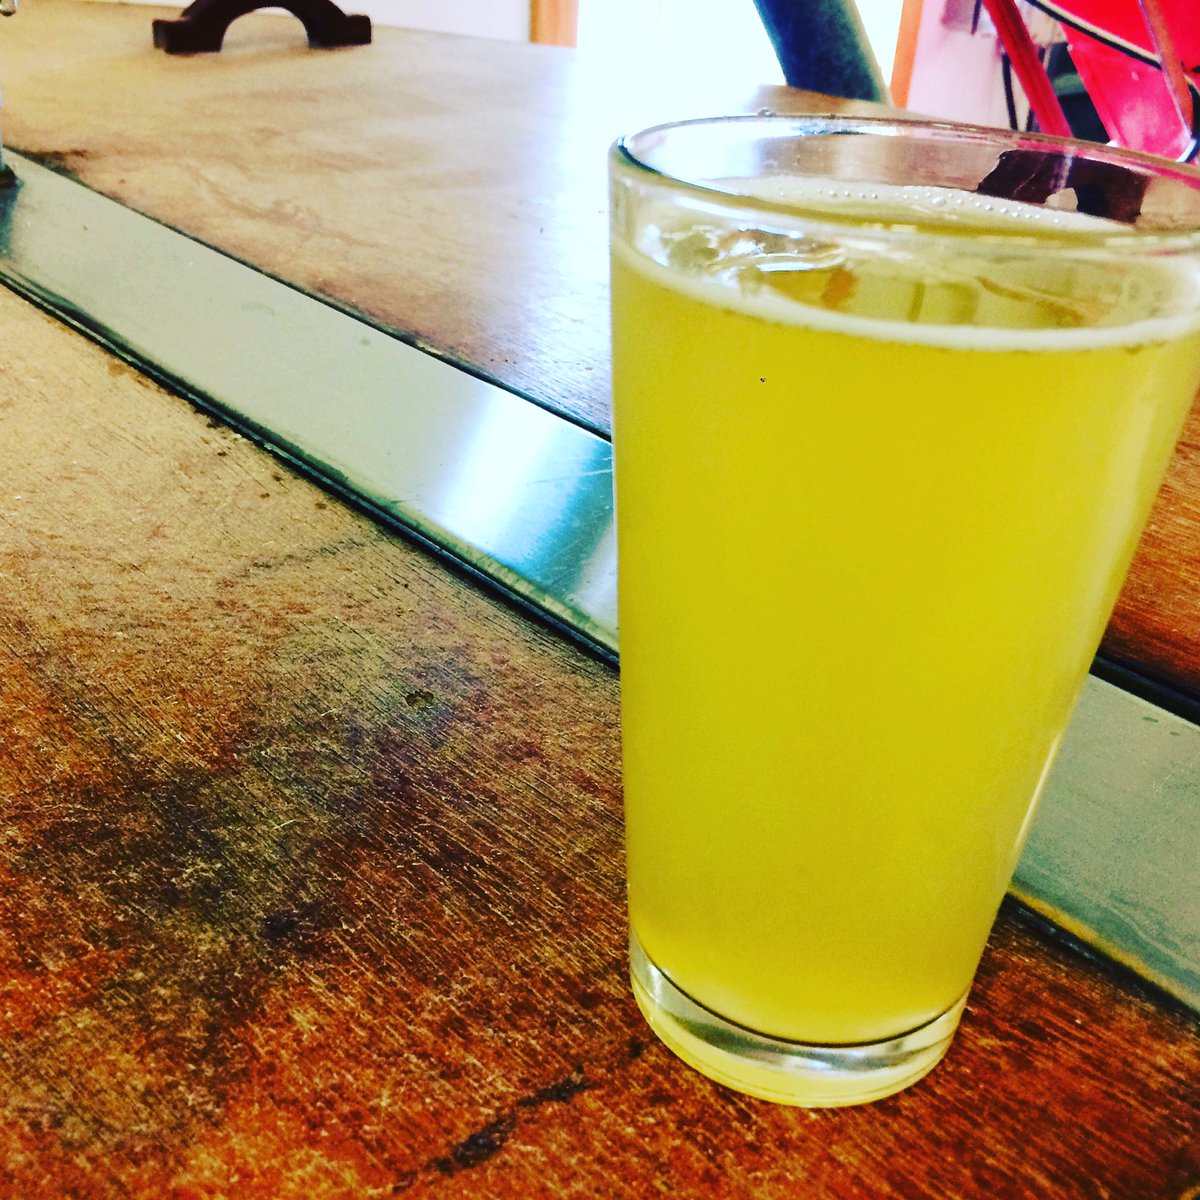 RT^@brewterrafirma: New cider on tap now!
Terra Forma Hard Cider is made from 100% Michigan apples! It’s 6% and clean tasting. Try some with your favorite fall dishes. #traversecity #cider #CraftBeer #puremichigan #Autumn #favorite #tcfoodie #family #wine #joy #livarbors #tcbeer